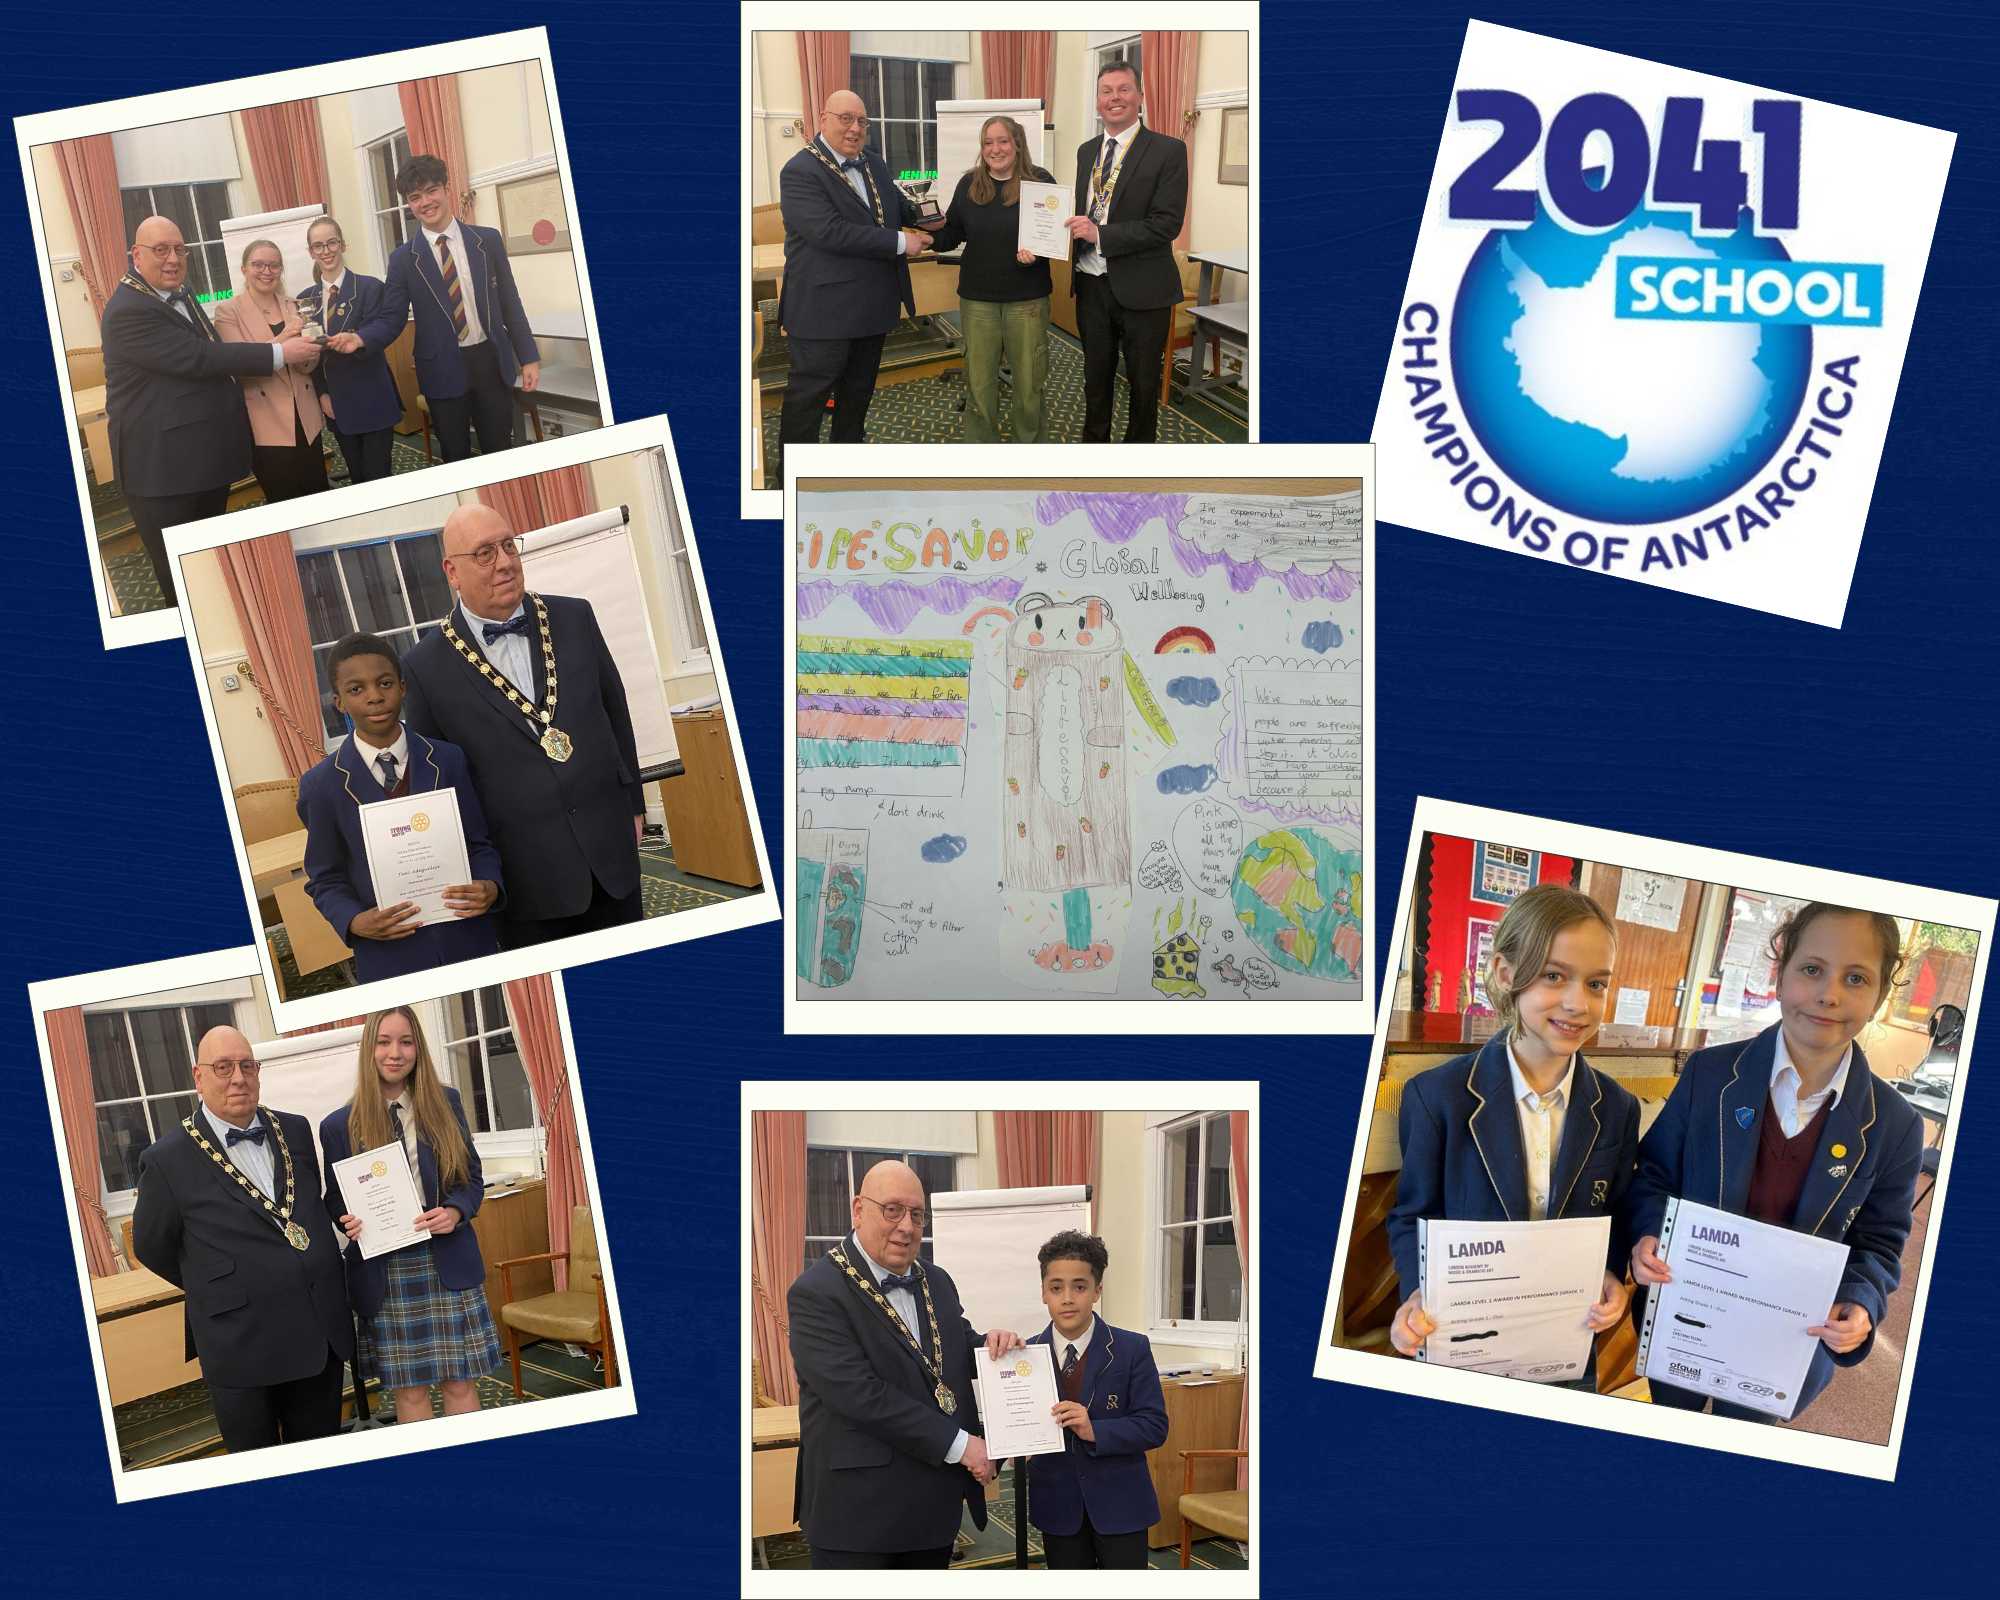 Spring Term successes at Rookwood